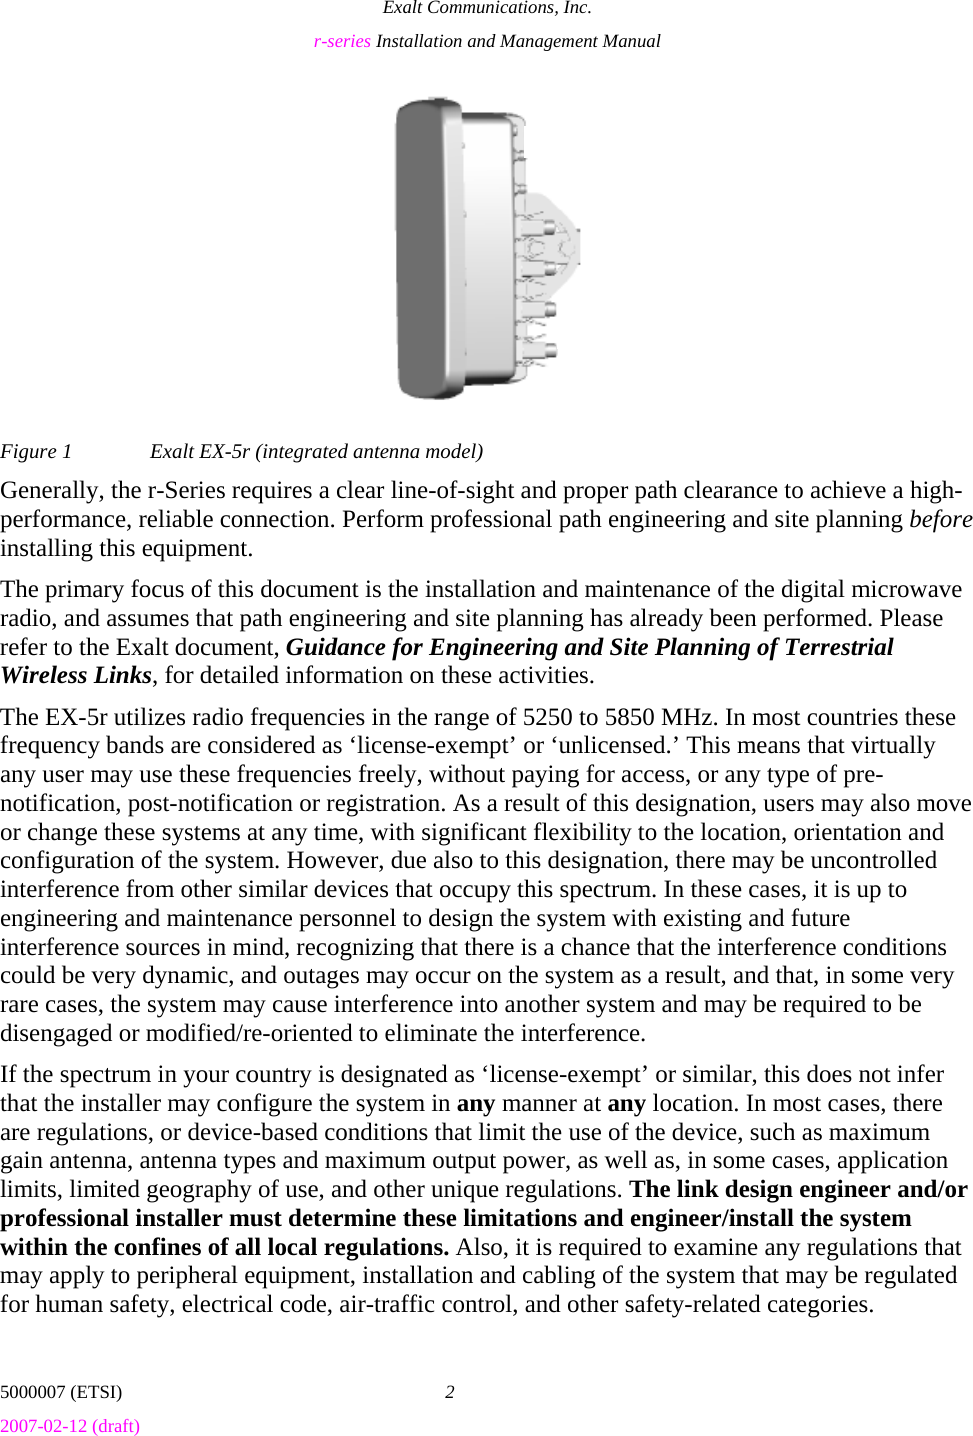 Exalt Communications, Inc. r-series Installation and Management Manual 5000007 (ETSI)  2 2007-02-12 (draft)  Figure 1  Exalt EX-5r (integrated antenna model) Generally, the r-Series requires a clear line-of-sight and proper path clearance to achieve a high-performance, reliable connection. Perform professional path engineering and site planning before installing this equipment.  The primary focus of this document is the installation and maintenance of the digital microwave radio, and assumes that path engineering and site planning has already been performed. Please refer to the Exalt document, Guidance for Engineering and Site Planning of Terrestrial Wireless Links, for detailed information on these activities. The EX-5r utilizes radio frequencies in the range of 5250 to 5850 MHz. In most countries these frequency bands are considered as ‘license-exempt’ or ‘unlicensed.’ This means that virtually any user may use these frequencies freely, without paying for access, or any type of pre-notification, post-notification or registration. As a result of this designation, users may also move or change these systems at any time, with significant flexibility to the location, orientation and configuration of the system. However, due also to this designation, there may be uncontrolled interference from other similar devices that occupy this spectrum. In these cases, it is up to engineering and maintenance personnel to design the system with existing and future interference sources in mind, recognizing that there is a chance that the interference conditions could be very dynamic, and outages may occur on the system as a result, and that, in some very rare cases, the system may cause interference into another system and may be required to be disengaged or modified/re-oriented to eliminate the interference. If the spectrum in your country is designated as ‘license-exempt’ or similar, this does not infer that the installer may configure the system in any manner at any location. In most cases, there are regulations, or device-based conditions that limit the use of the device, such as maximum gain antenna, antenna types and maximum output power, as well as, in some cases, application limits, limited geography of use, and other unique regulations. The link design engineer and/or professional installer must determine these limitations and engineer/install the system within the confines of all local regulations. Also, it is required to examine any regulations that may apply to peripheral equipment, installation and cabling of the system that may be regulated for human safety, electrical code, air-traffic control, and other safety-related categories. 